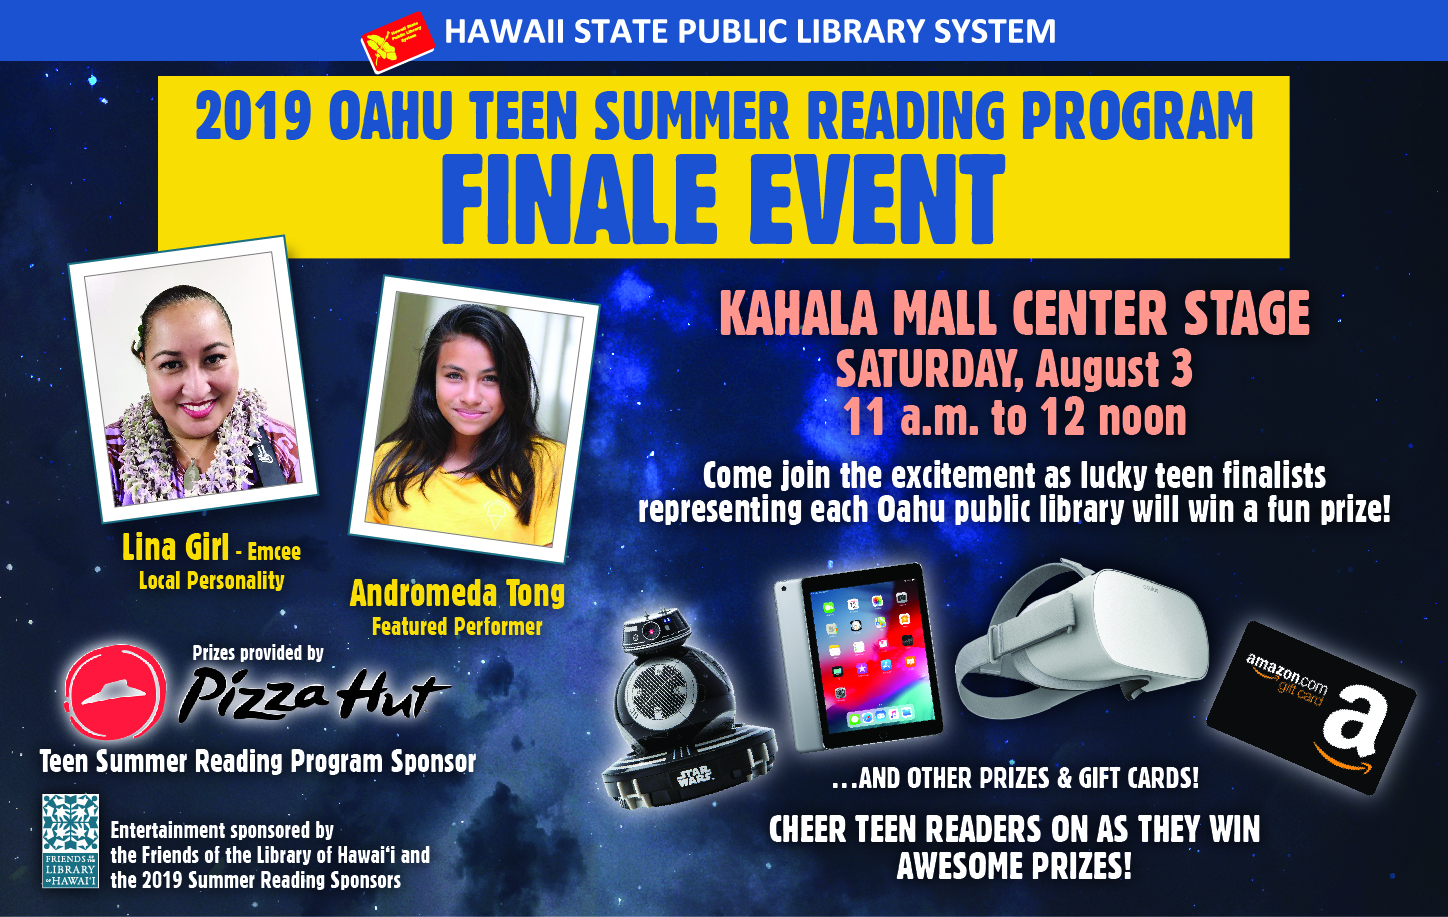 Hawaii State Public Library